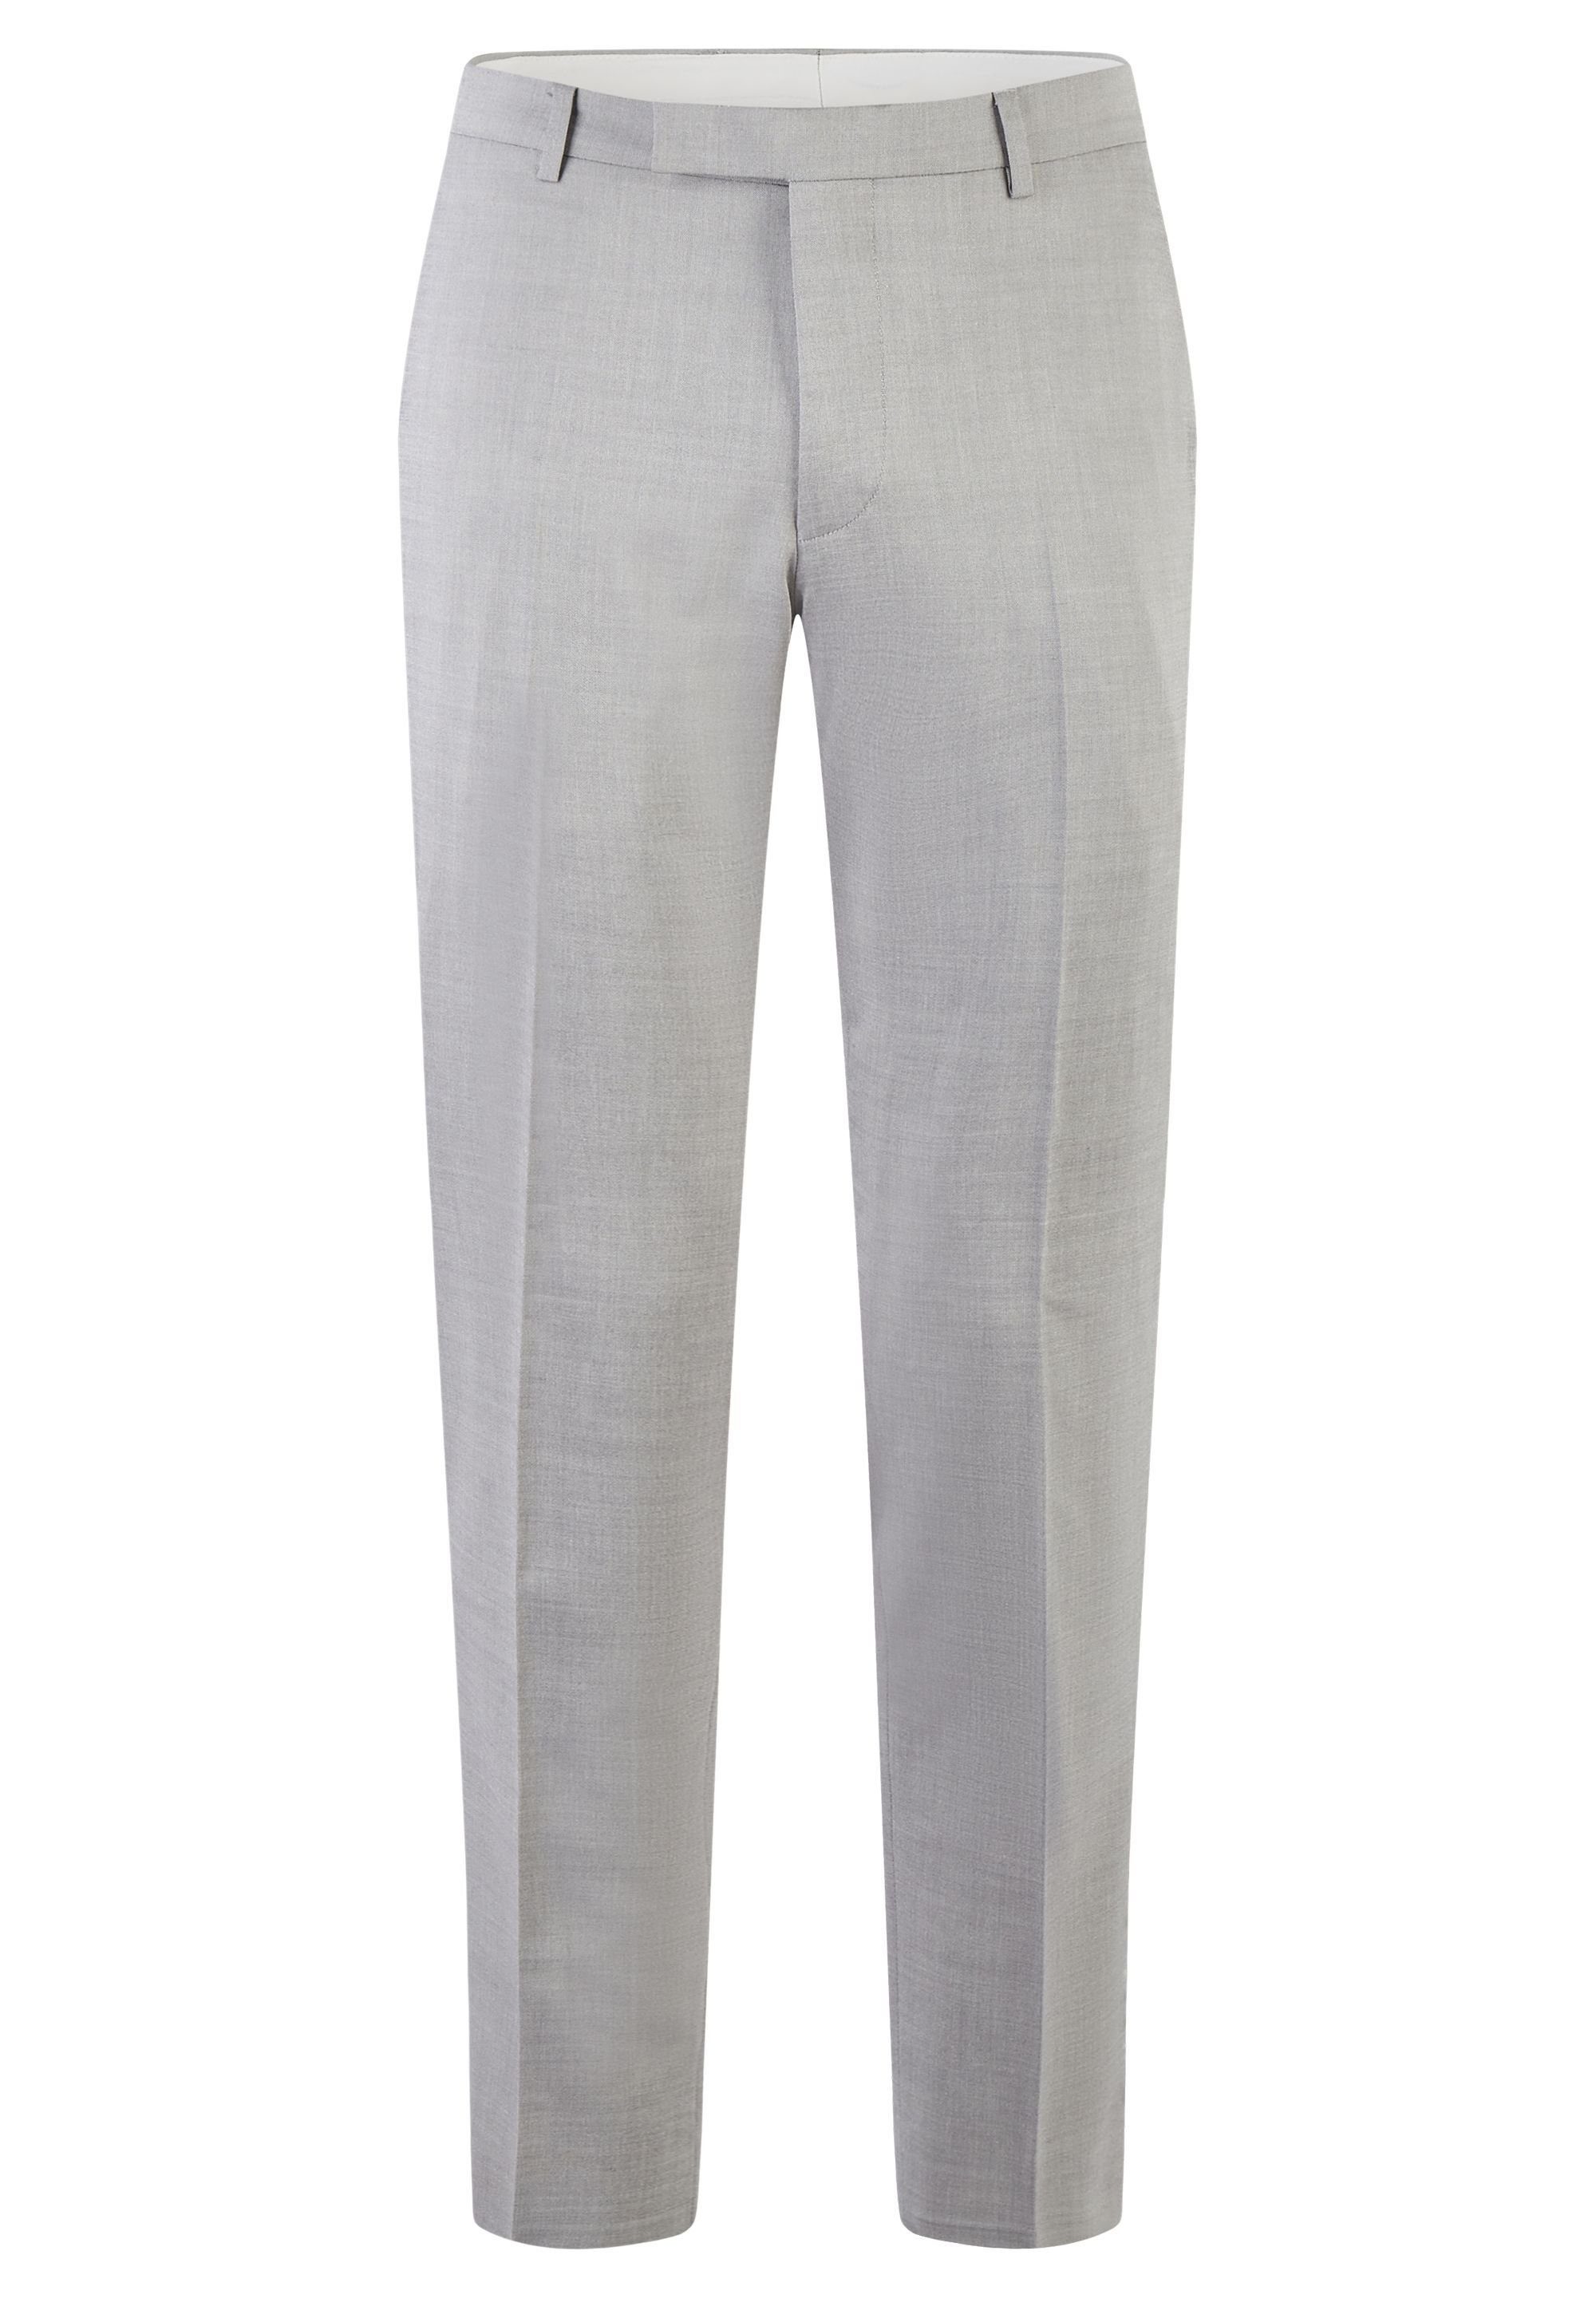 HECHTER PARIS Anzughose mit Pin-Ponit-Muster grey